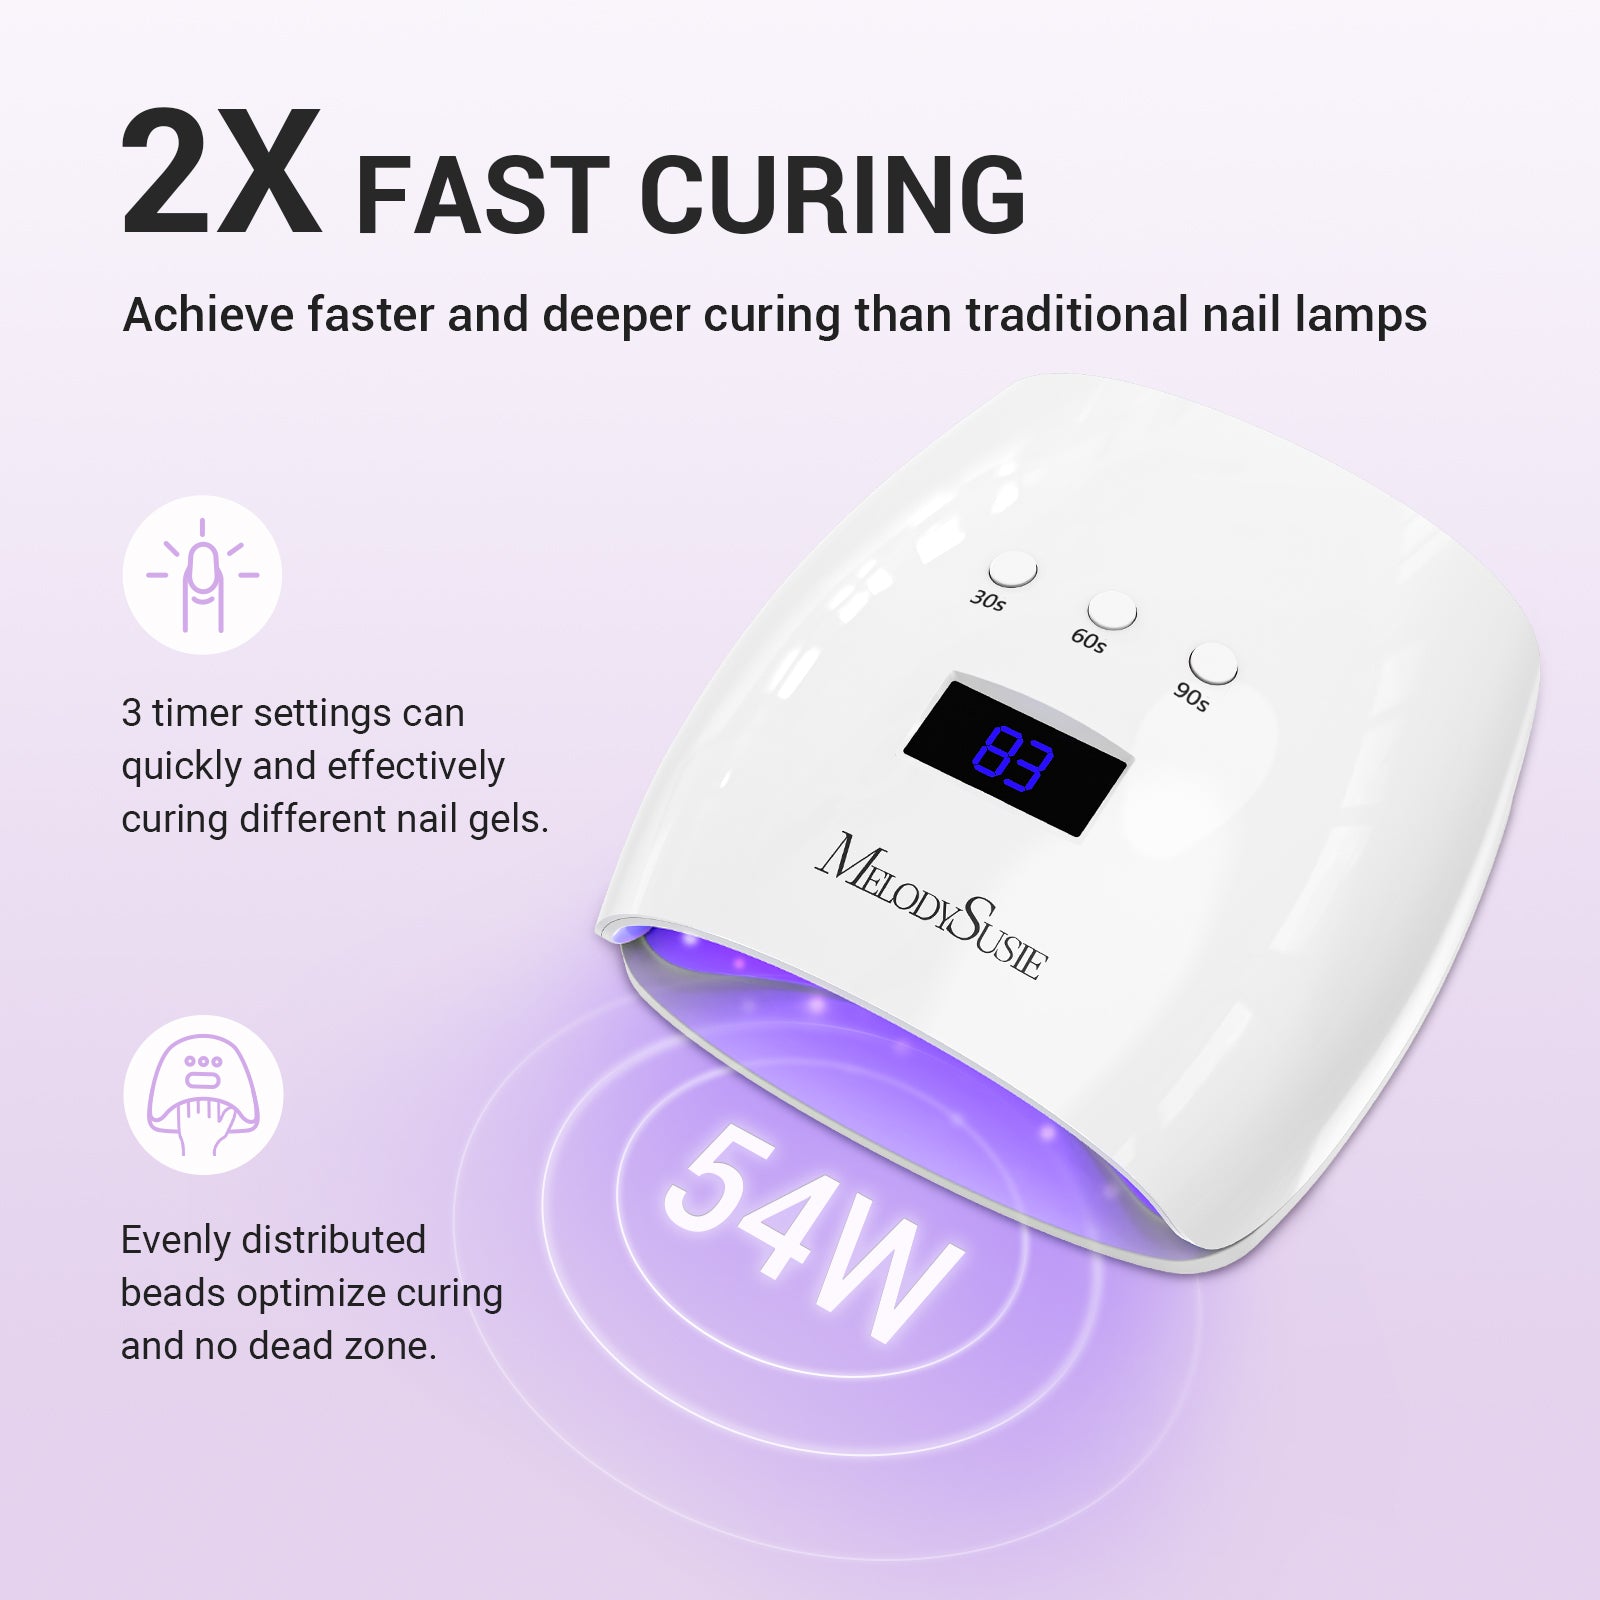 54W Professional UV Gel Nail Lamp with LED Light Nail Polish Quick Dryer  and Nail Care-Pink - Walmart.com